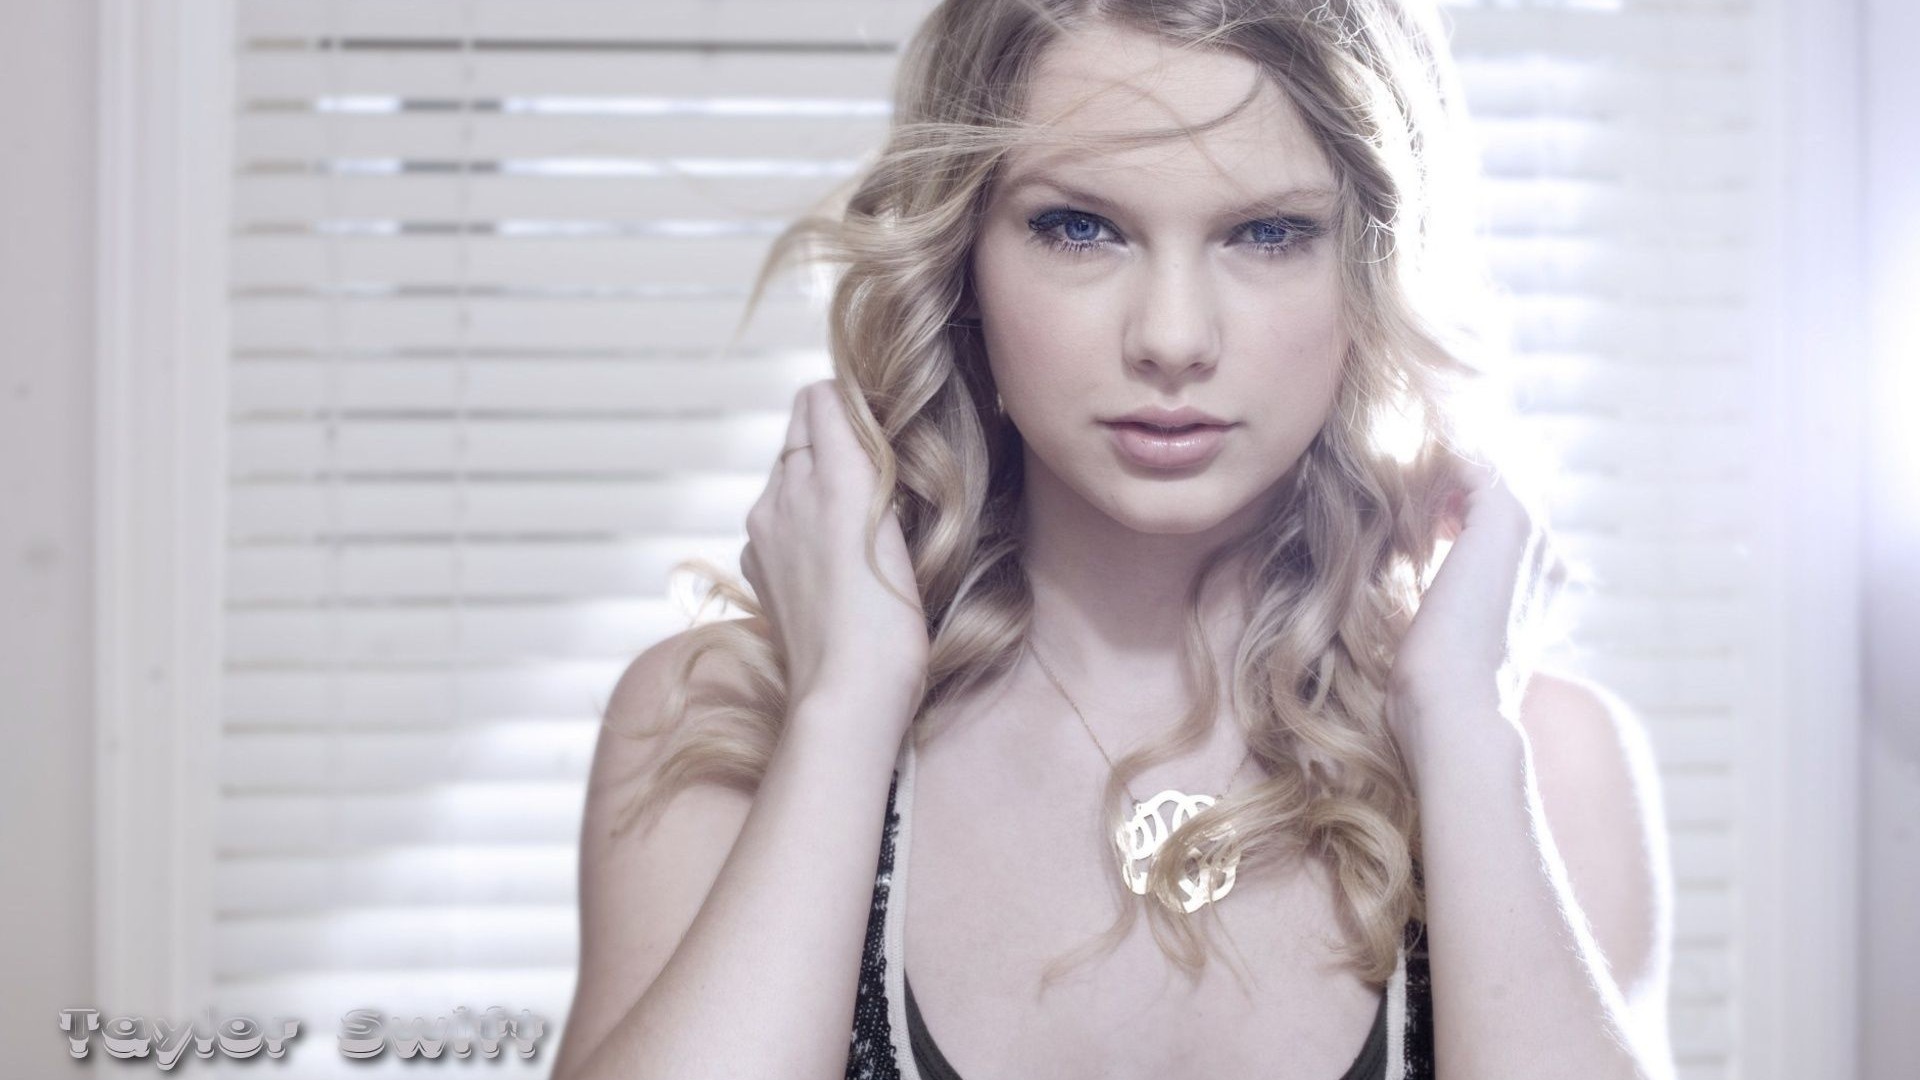 Taylor Swift #077 - 1920x1080 Wallpapers Pictures Photos Images